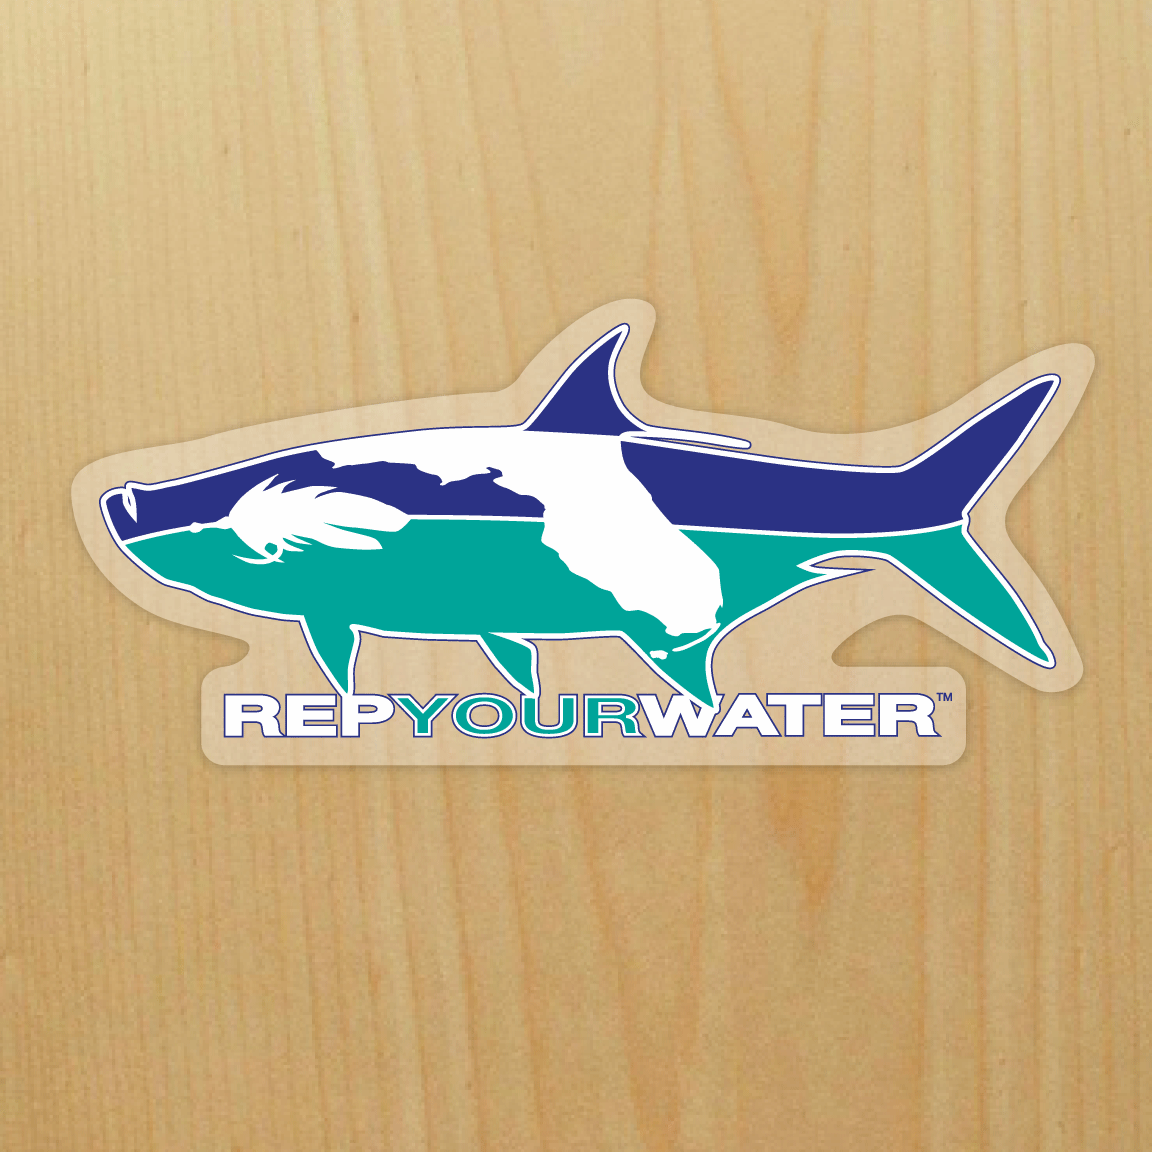 A sticker is shown on a wood background - the sticker is a tarpon shape in blue and turquoise with a fly and the state shape of Florida inside of the fish.